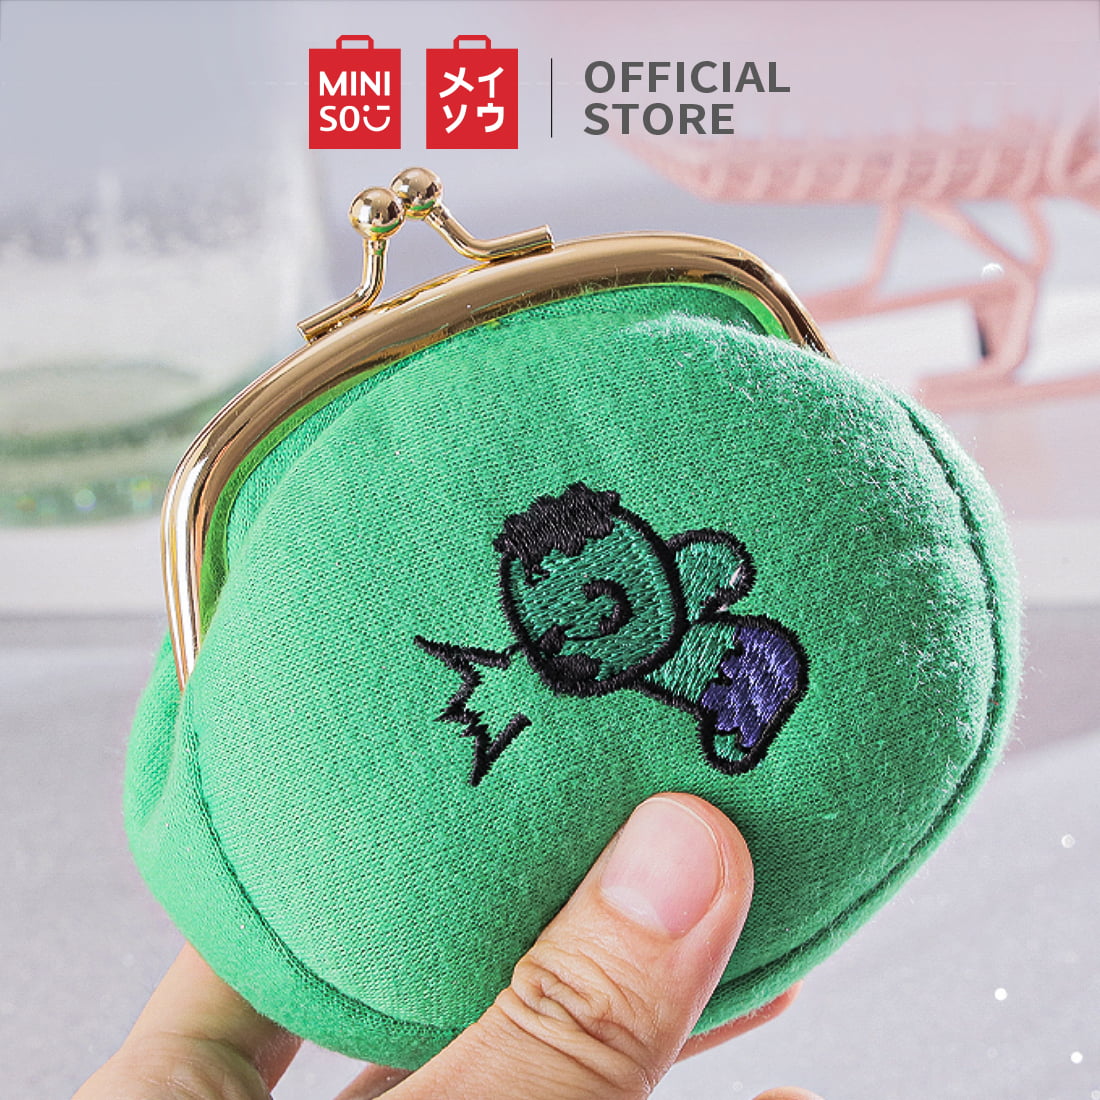 MINISO Mauritius - Adventure Time- Coin Purse🤩🤩 Rs 209 Available in all  of our shops and also on our online shop miniso.mu/ Treat yourself with our  Online Sales! 🤩 MINISO Mauritius is